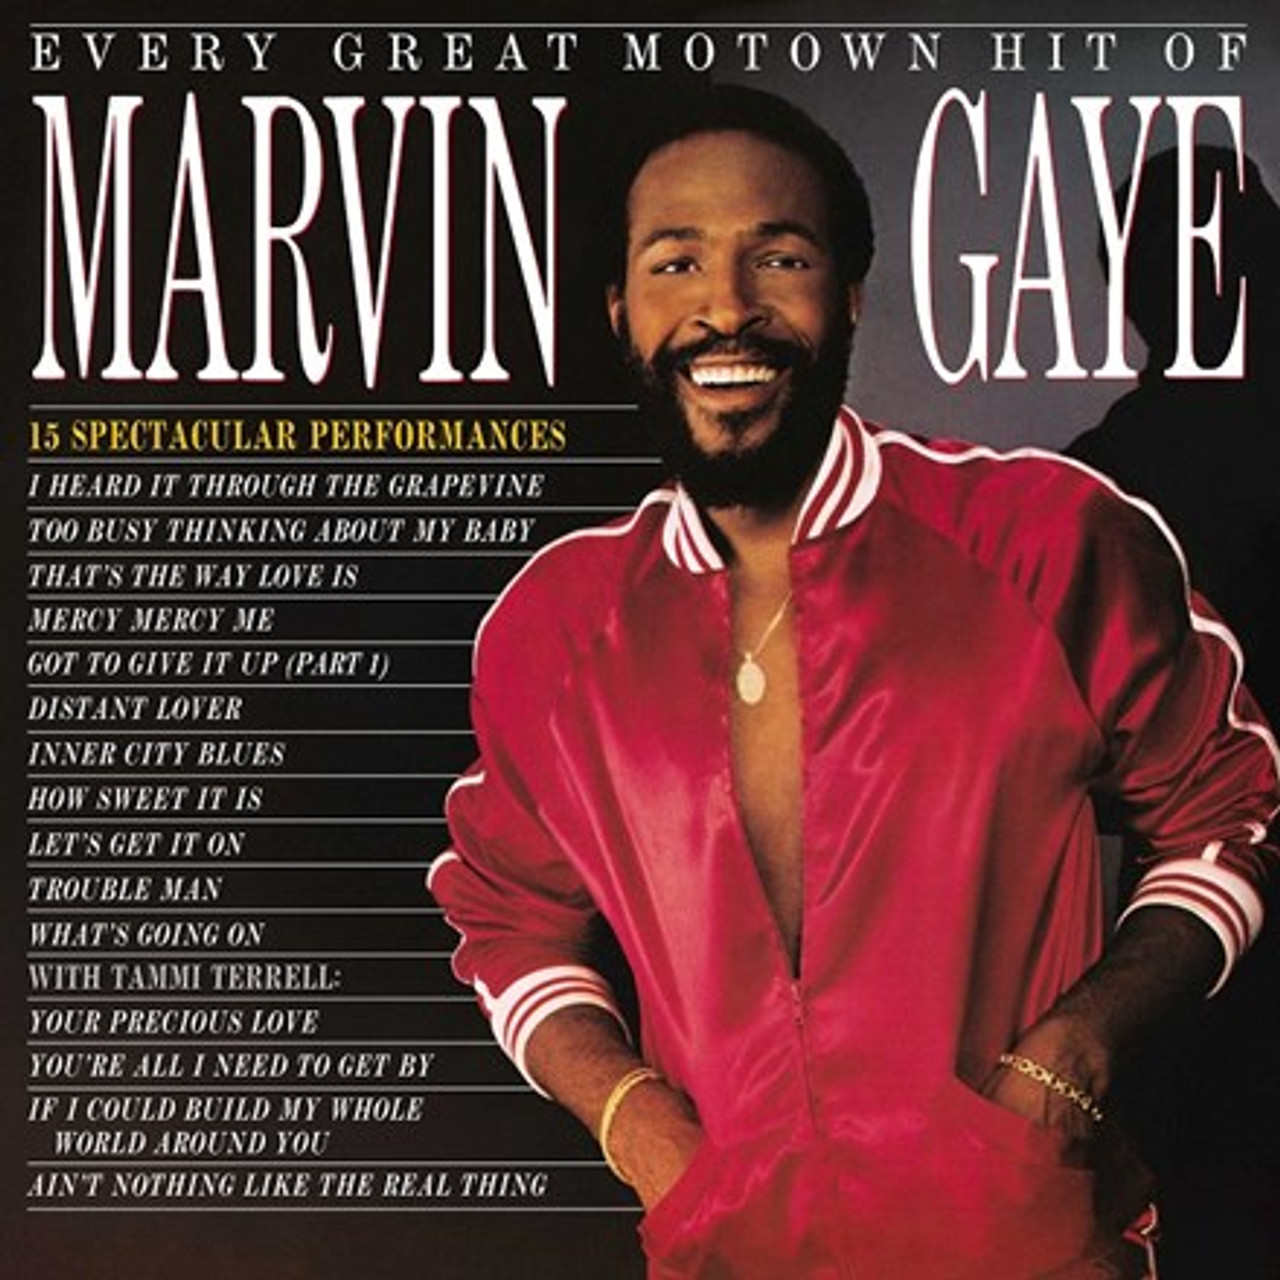 Marvin Gaye - Every Great Motown Hit of Marvin Gaye: 15 Spectacular  Performances (Vinyl LP) - Music Direct